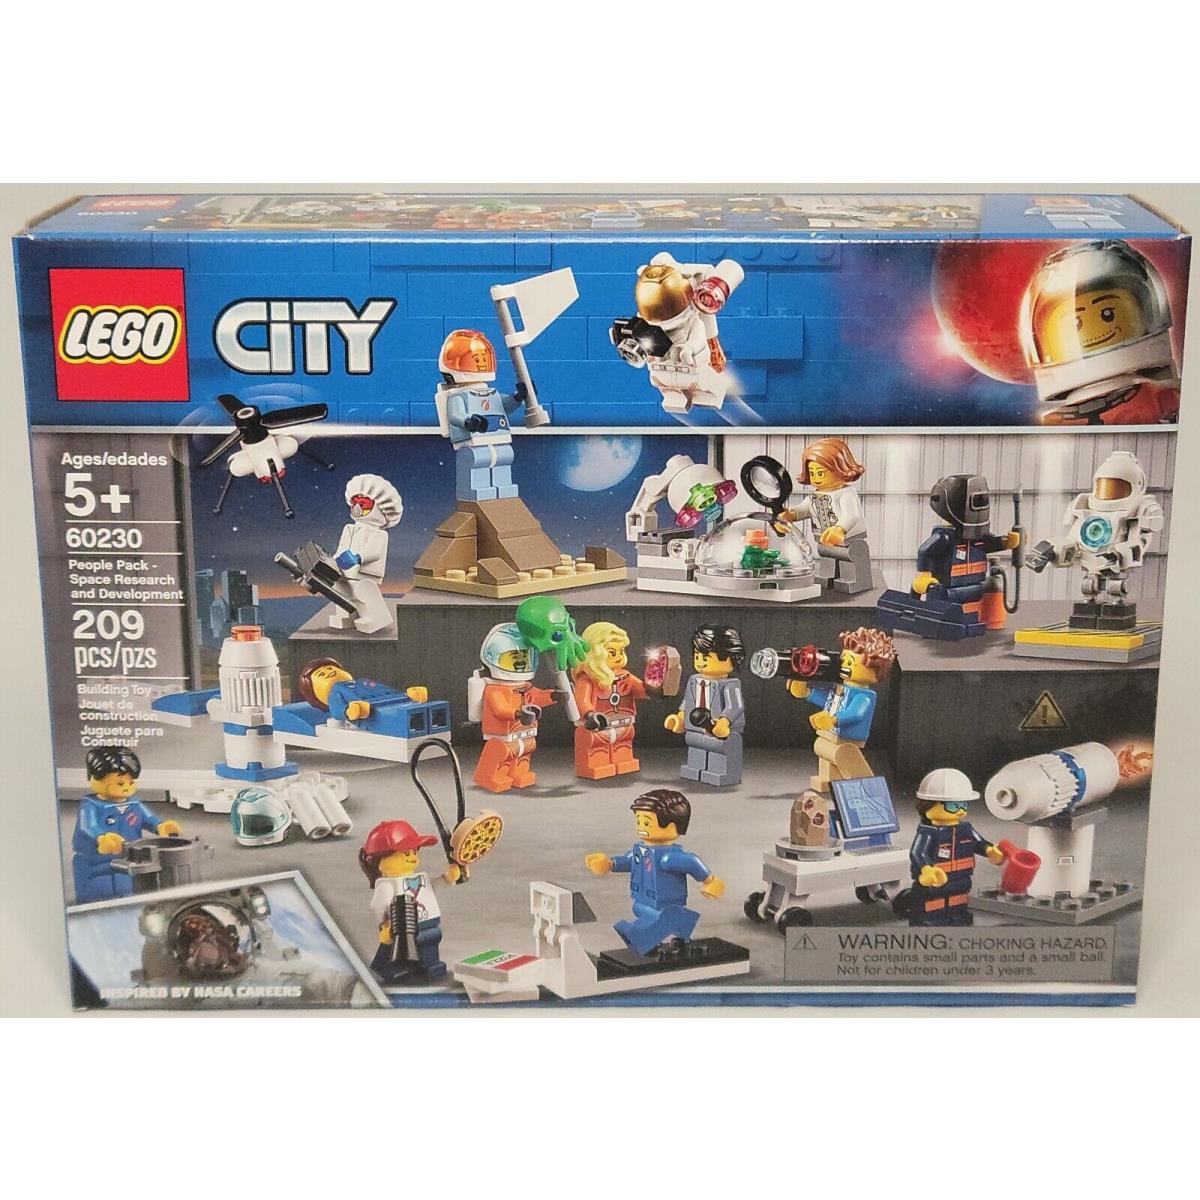 Lego 60230 People Pack - Space Research and Development Minifigures Astronaut